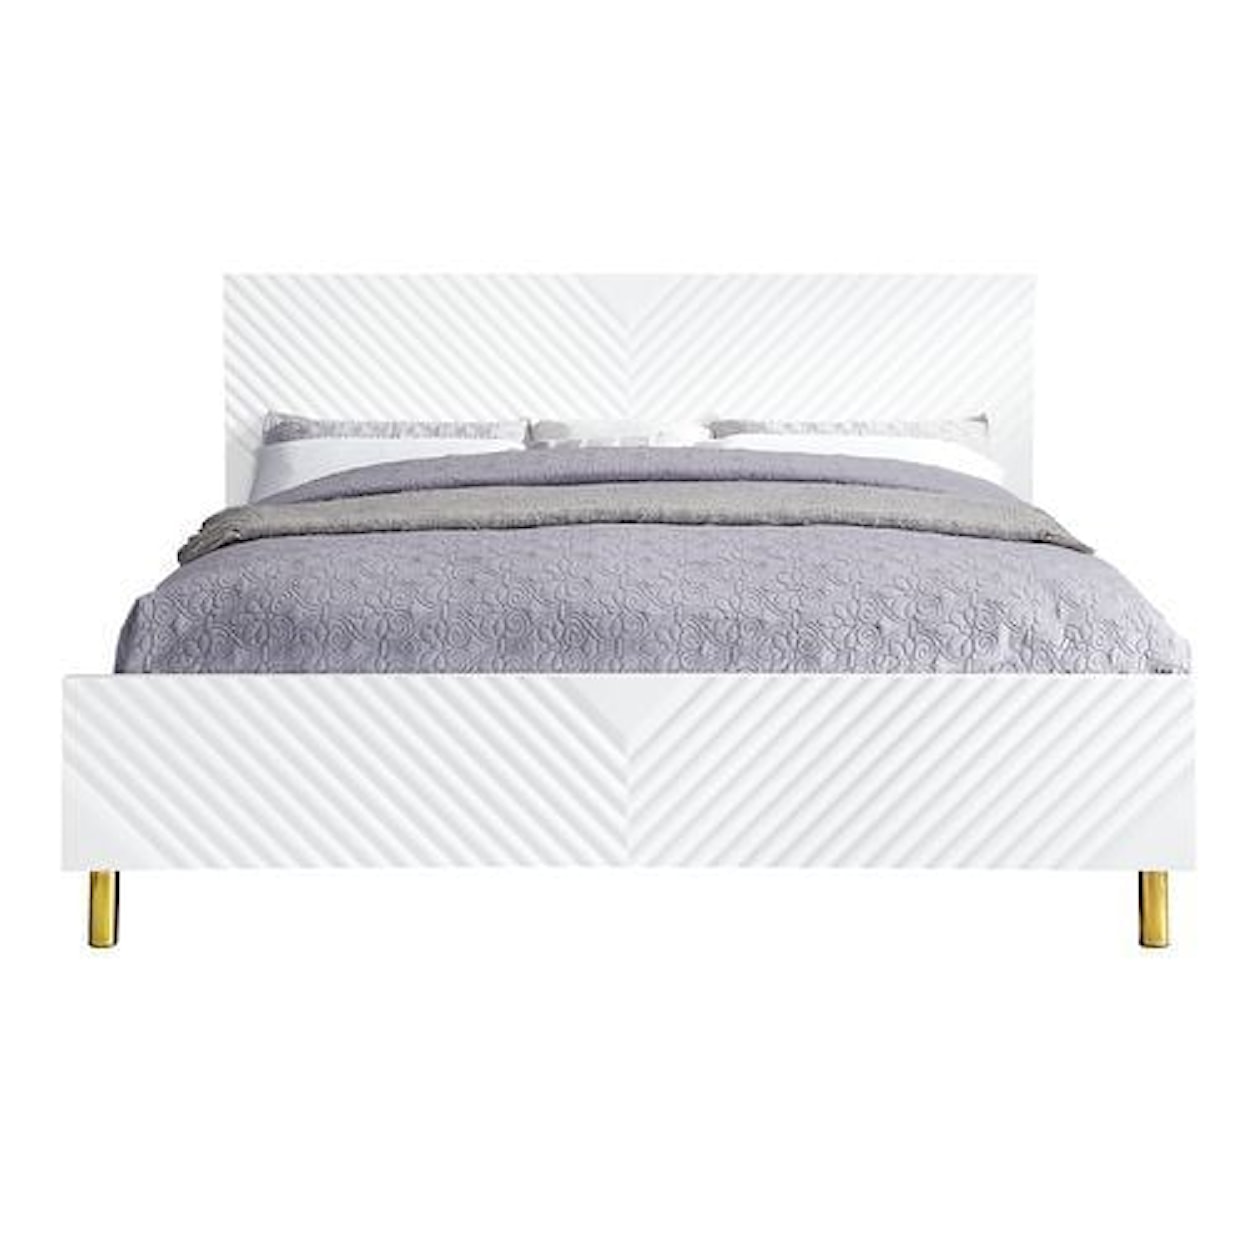 Acme Furniture Gaines King Bed